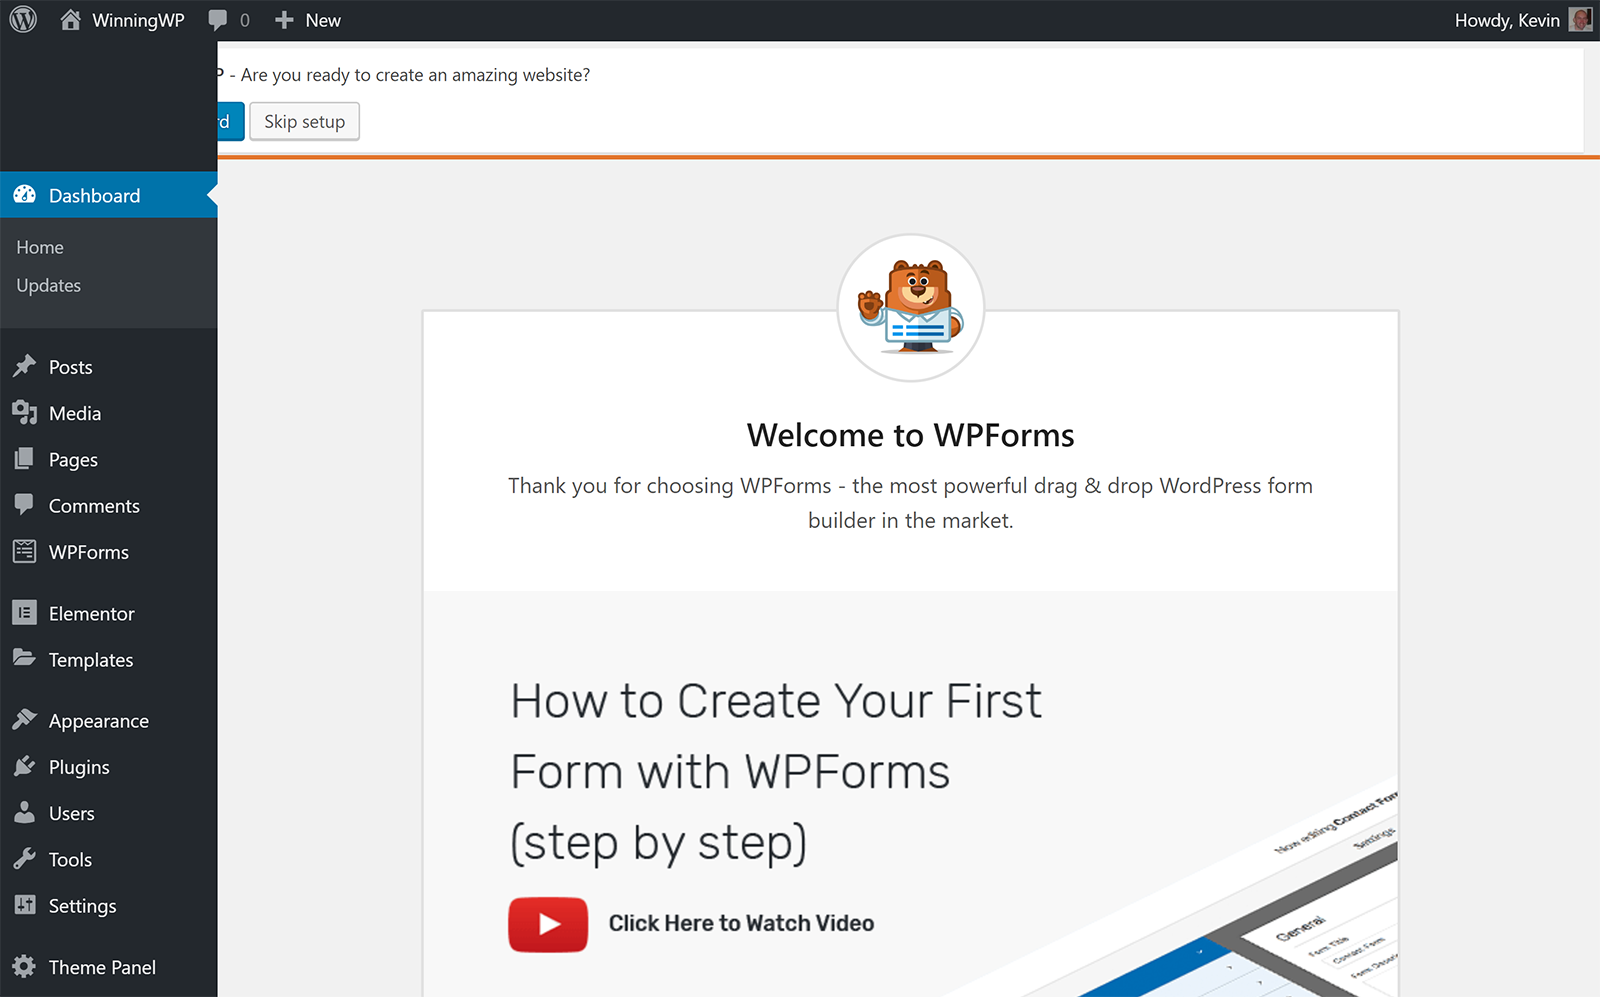 Getting Started with WP Forms